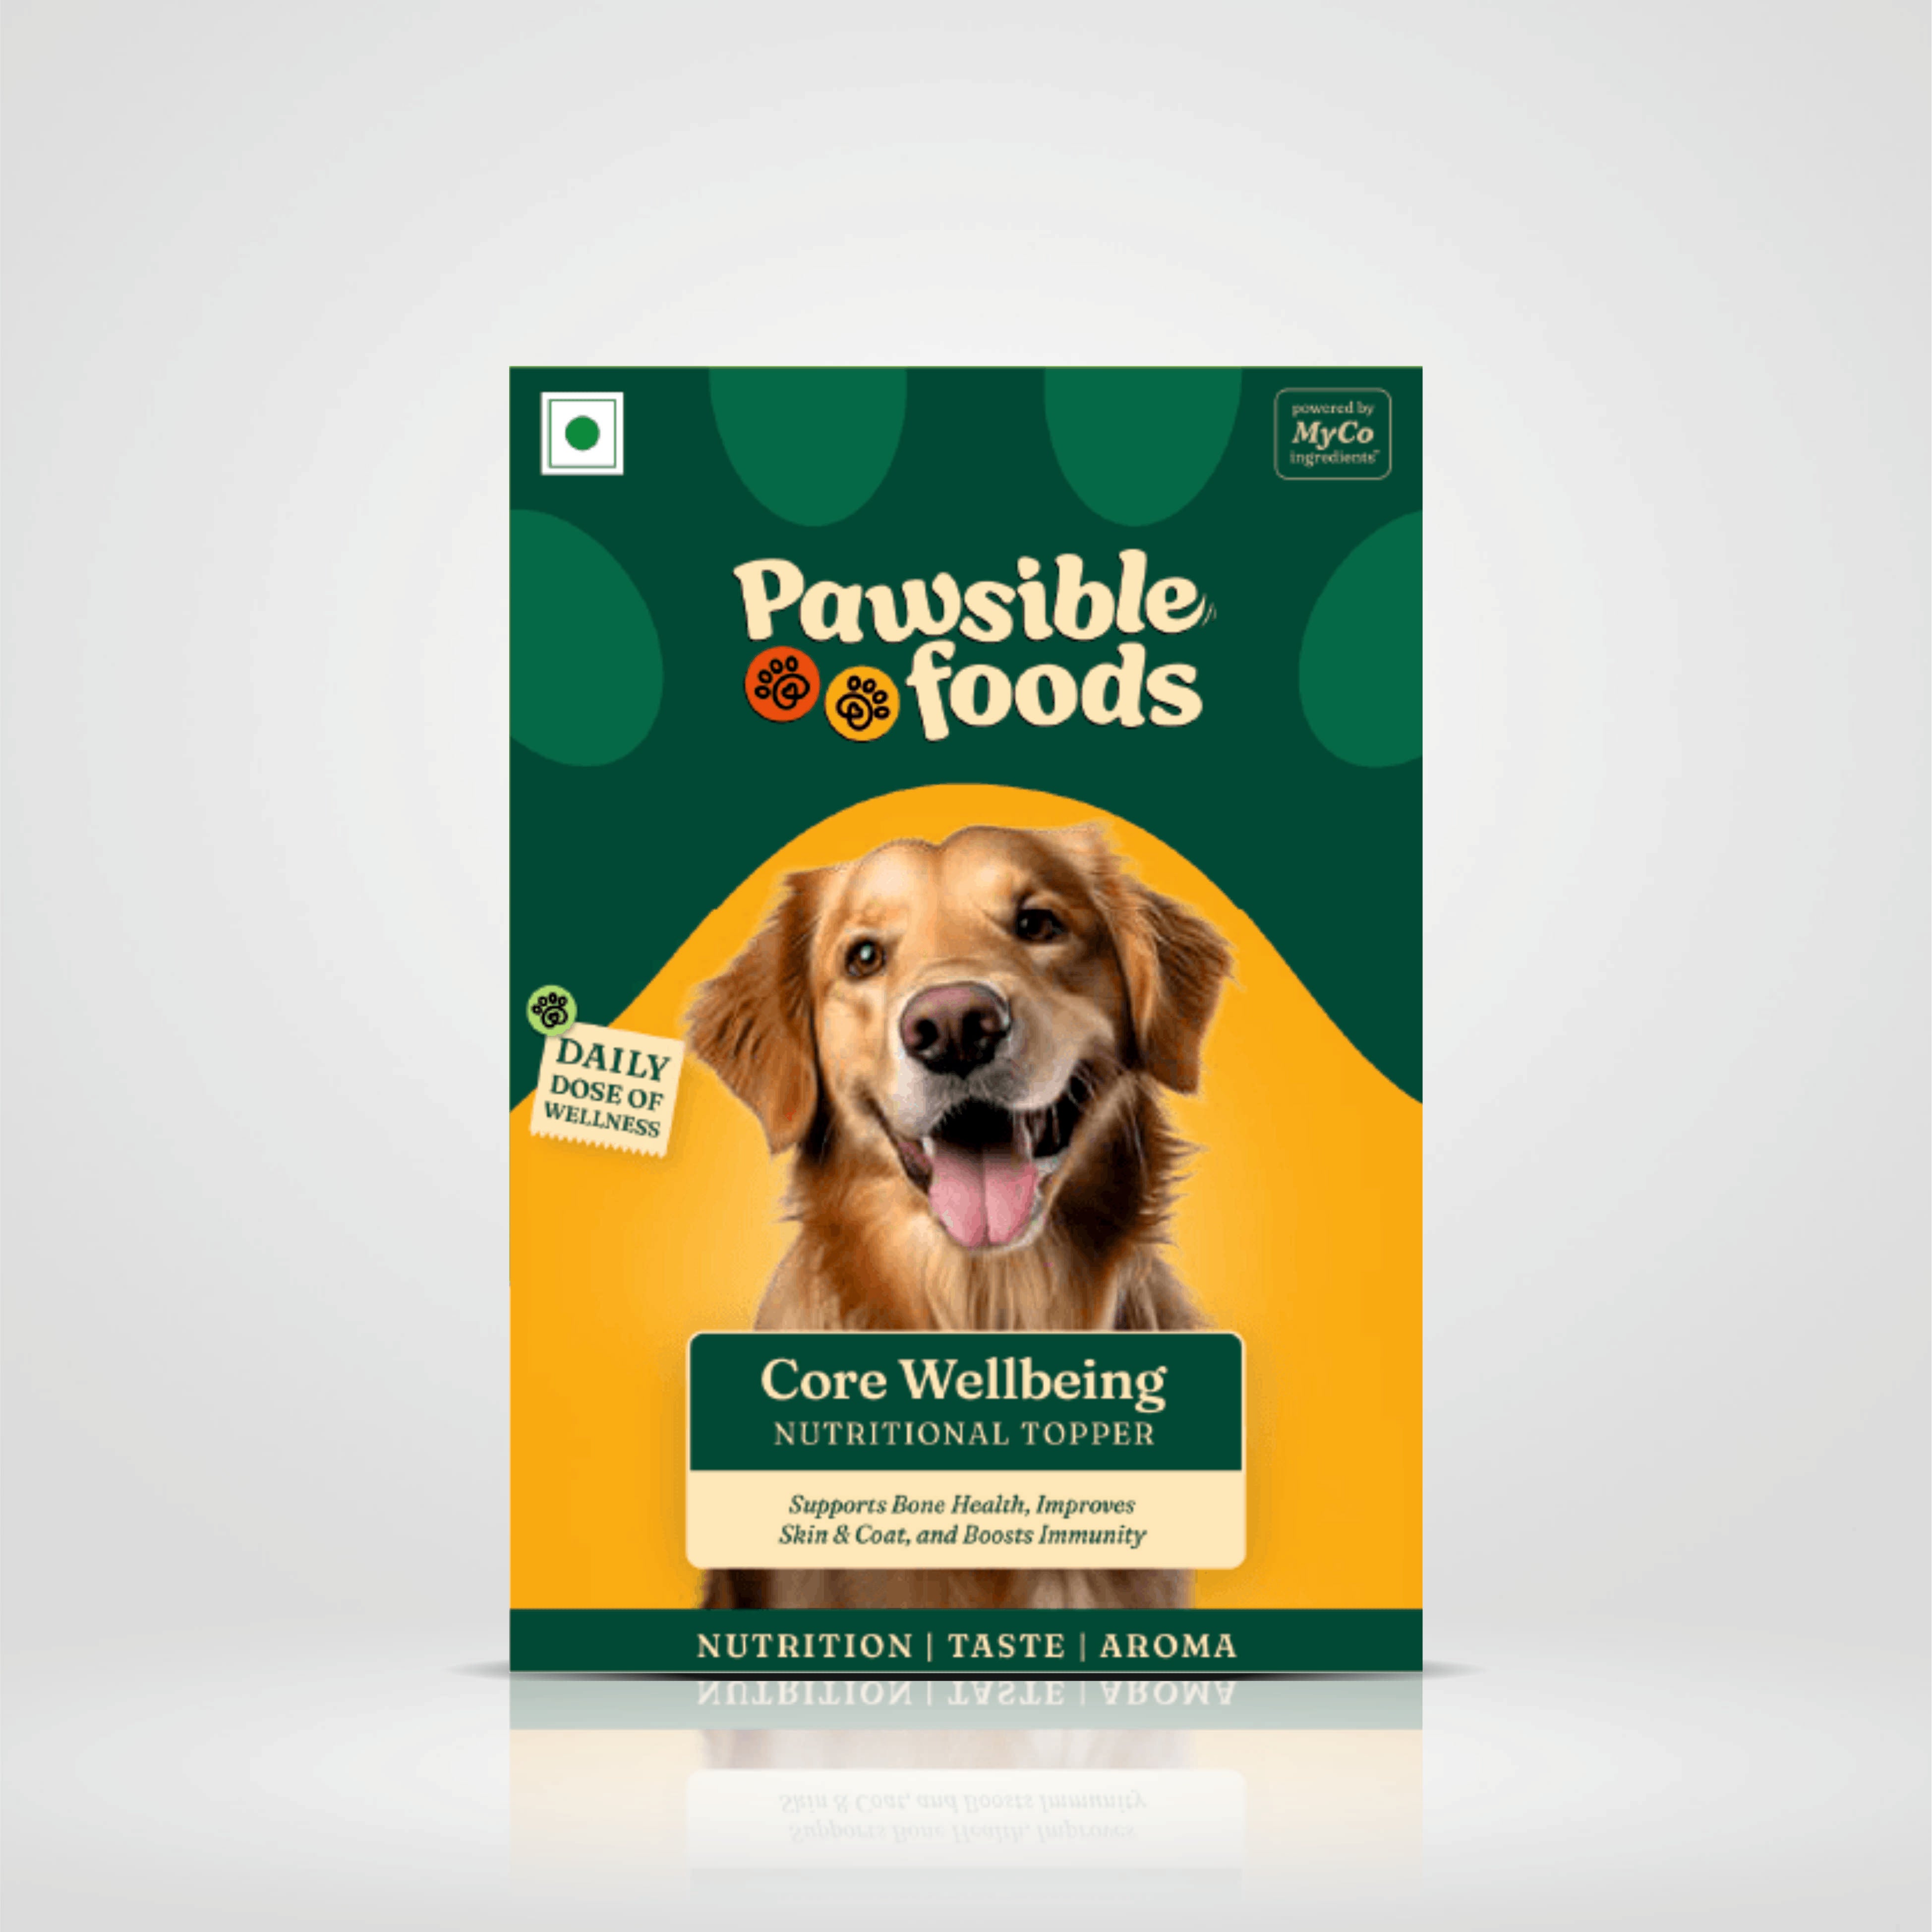 Pawsible Foods: Nutritional Topper